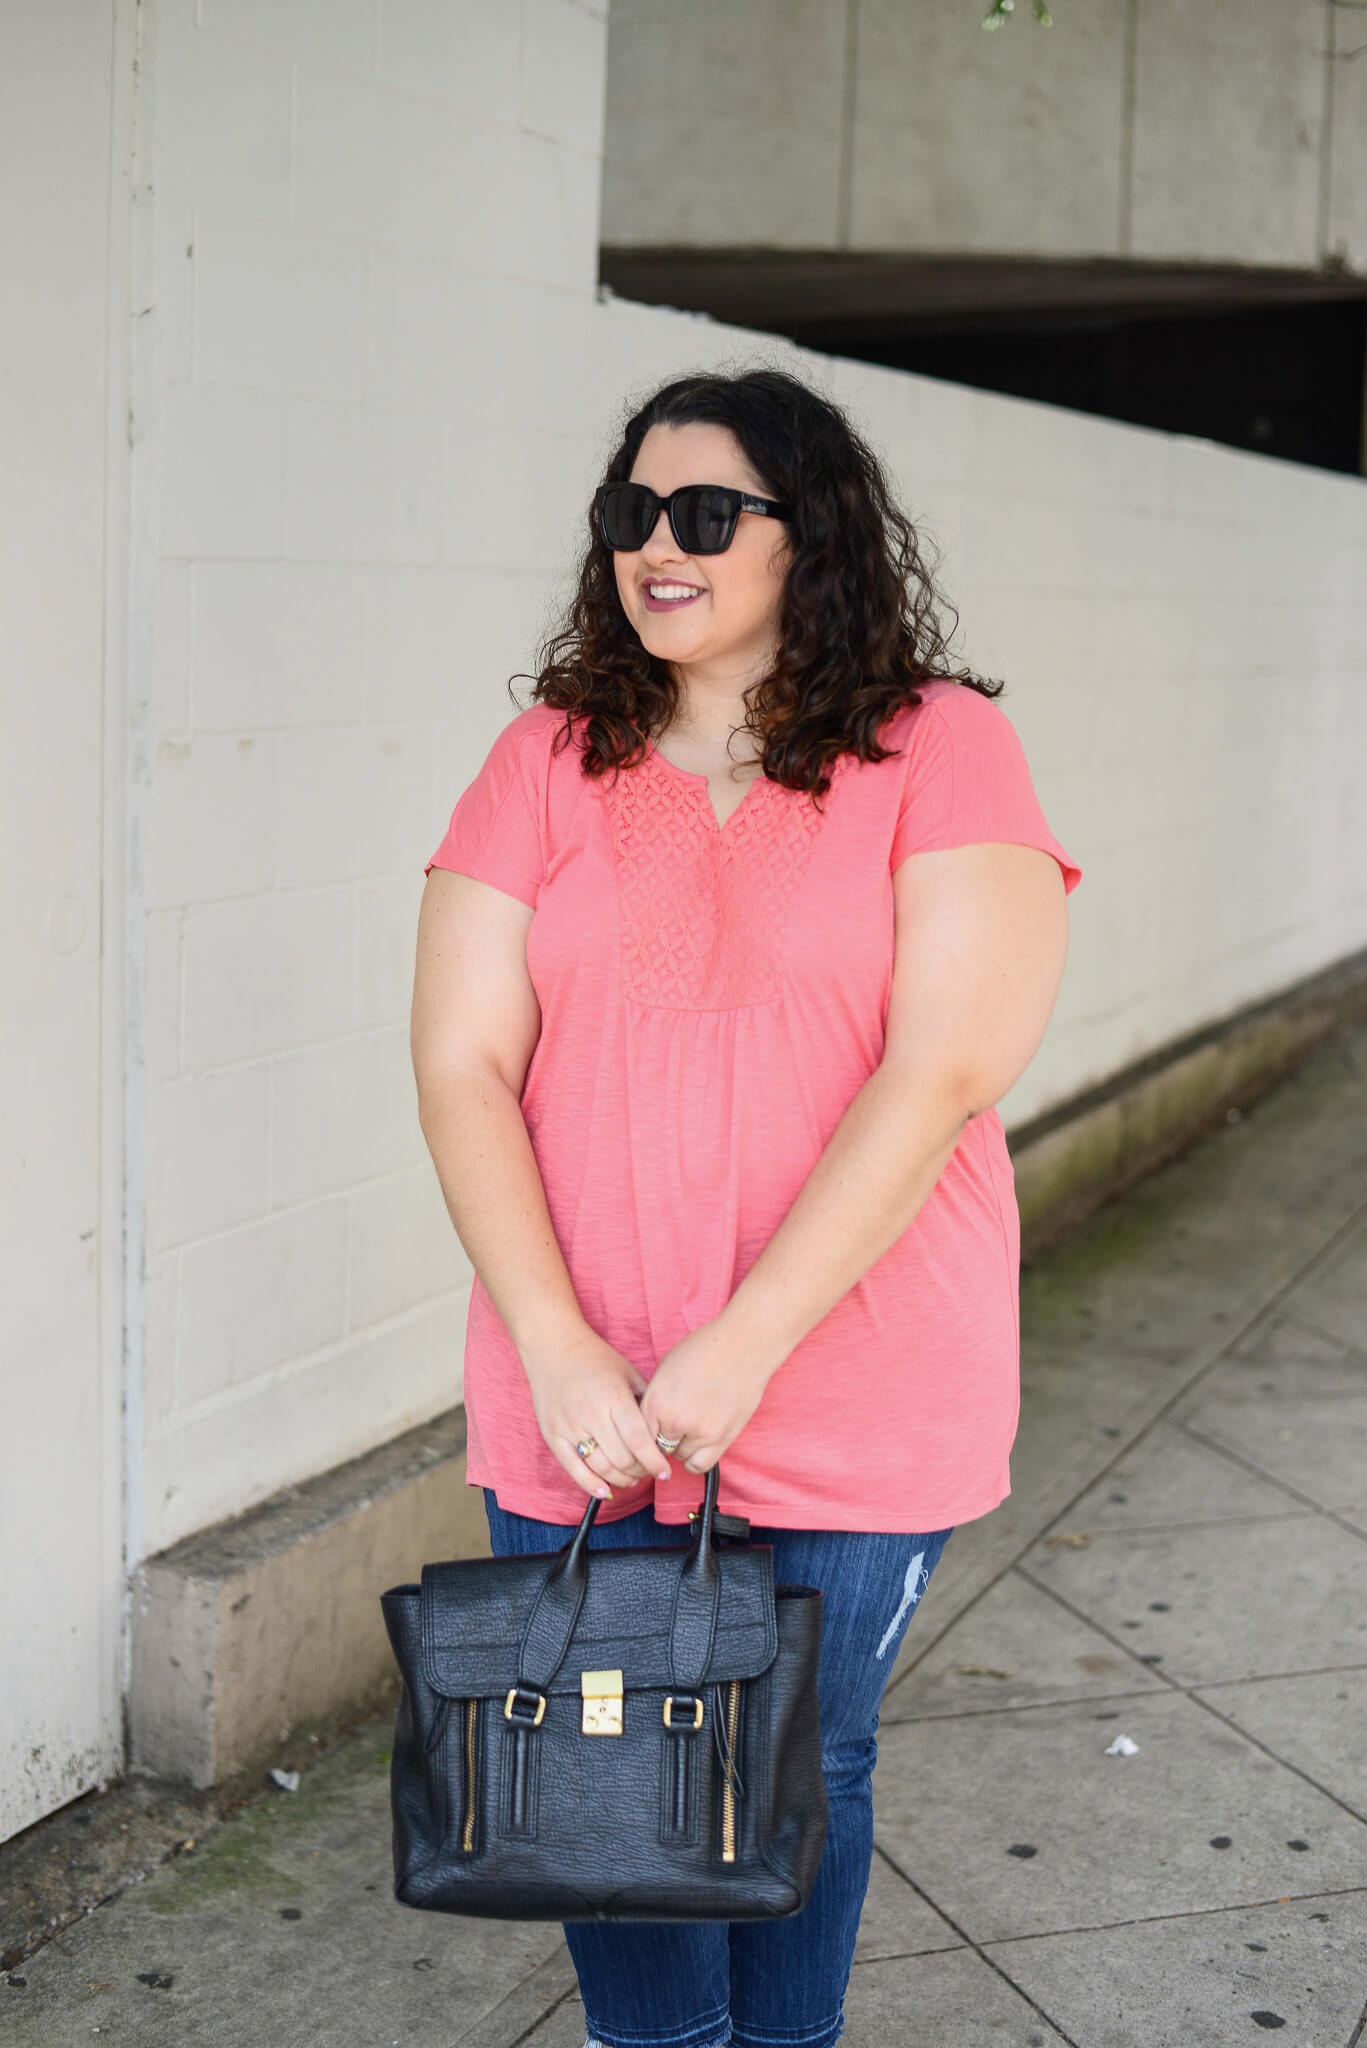 Exploring my own city is a lot of fun and doing so in bright colors is even better. This cotton short sleeve top from Just My Size is perfect for the Houston summers